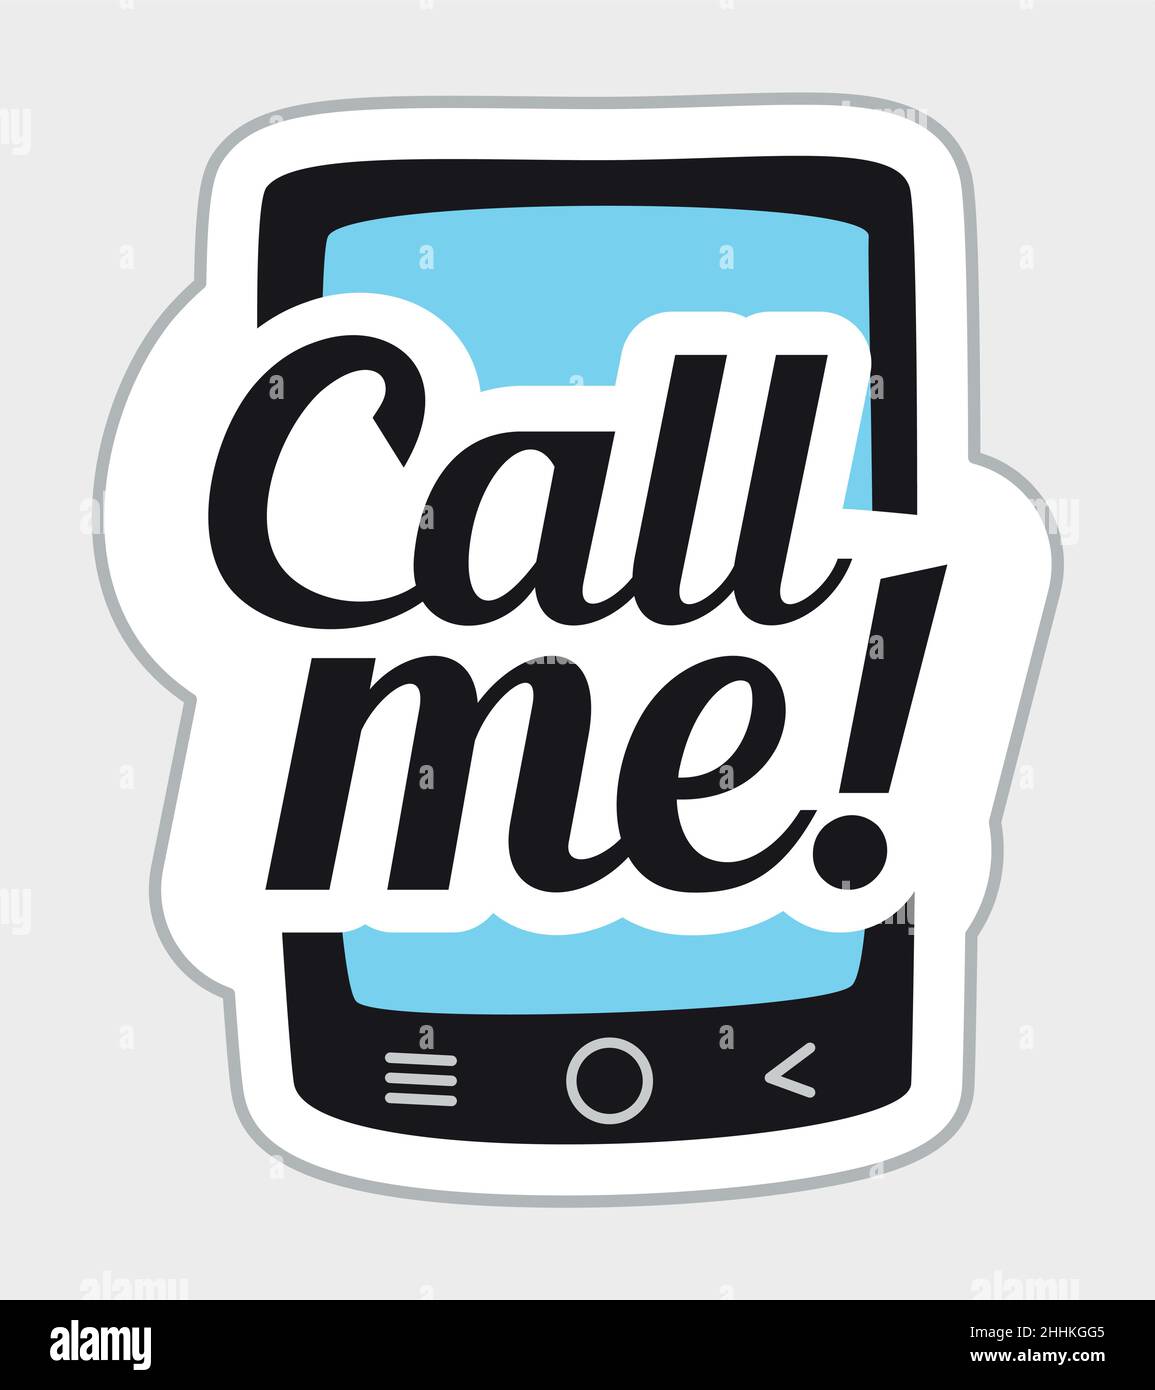 Call Me sticker in retro style. Vector illustration isolated on white background Stock Vector